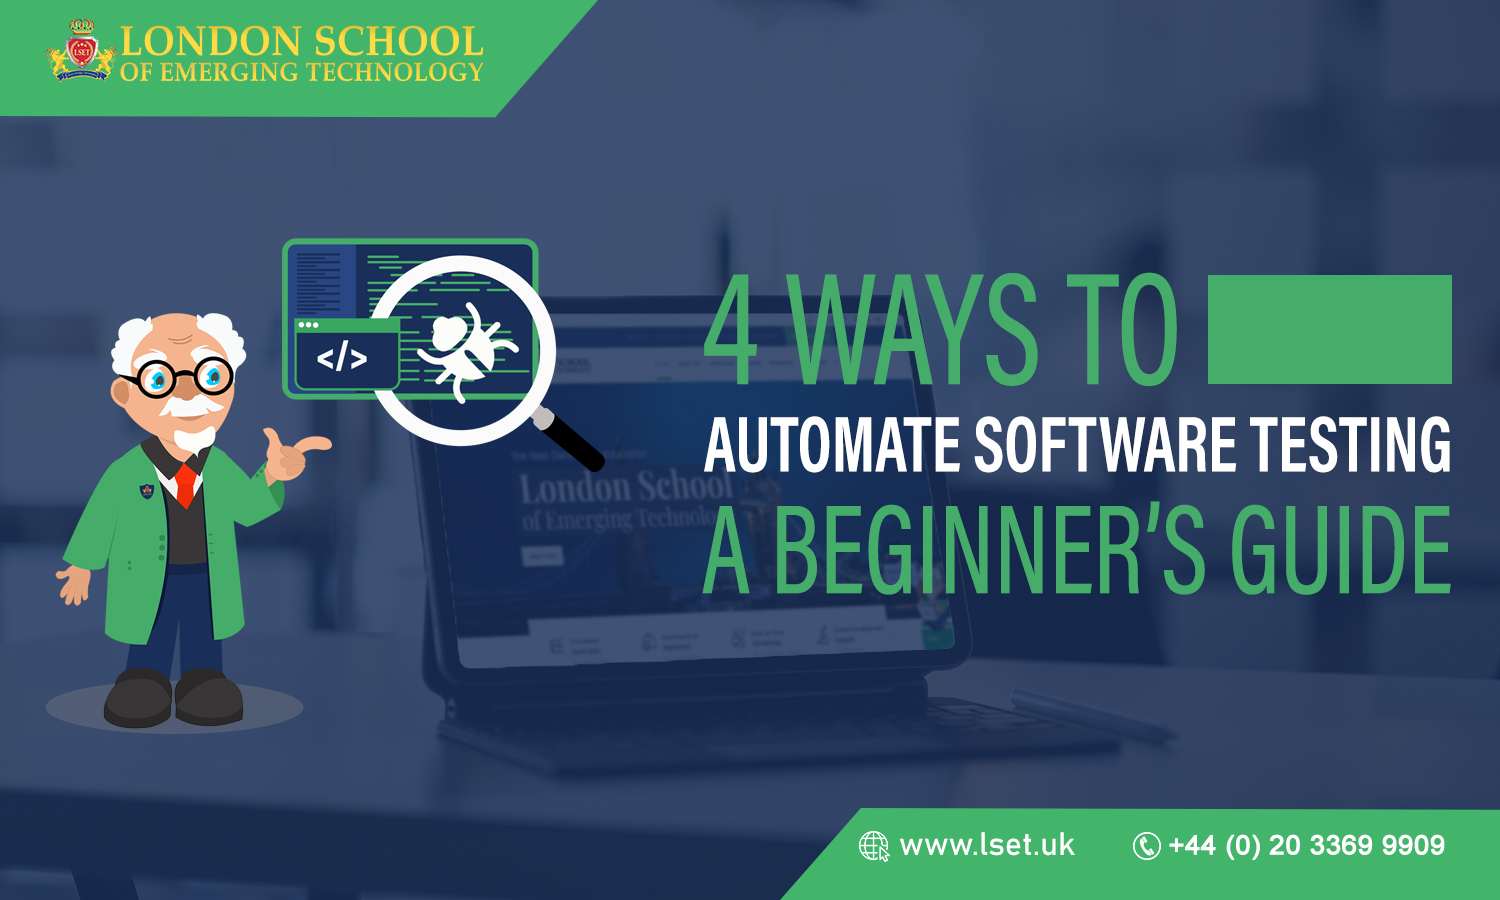 4 Ways to Automate Software Testing A Beginner’s Guide